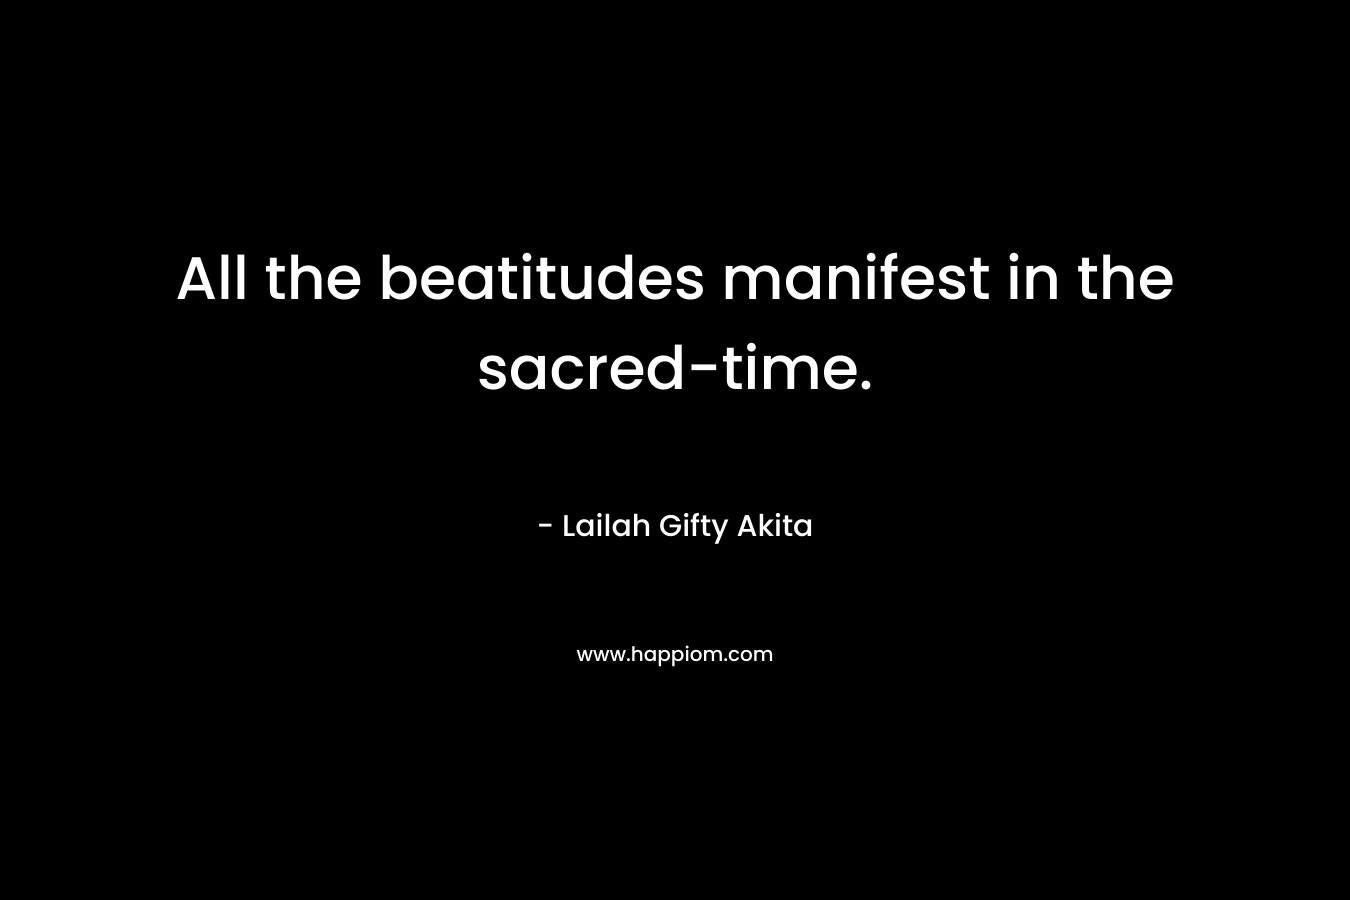 All the beatitudes manifest in the sacred-time.